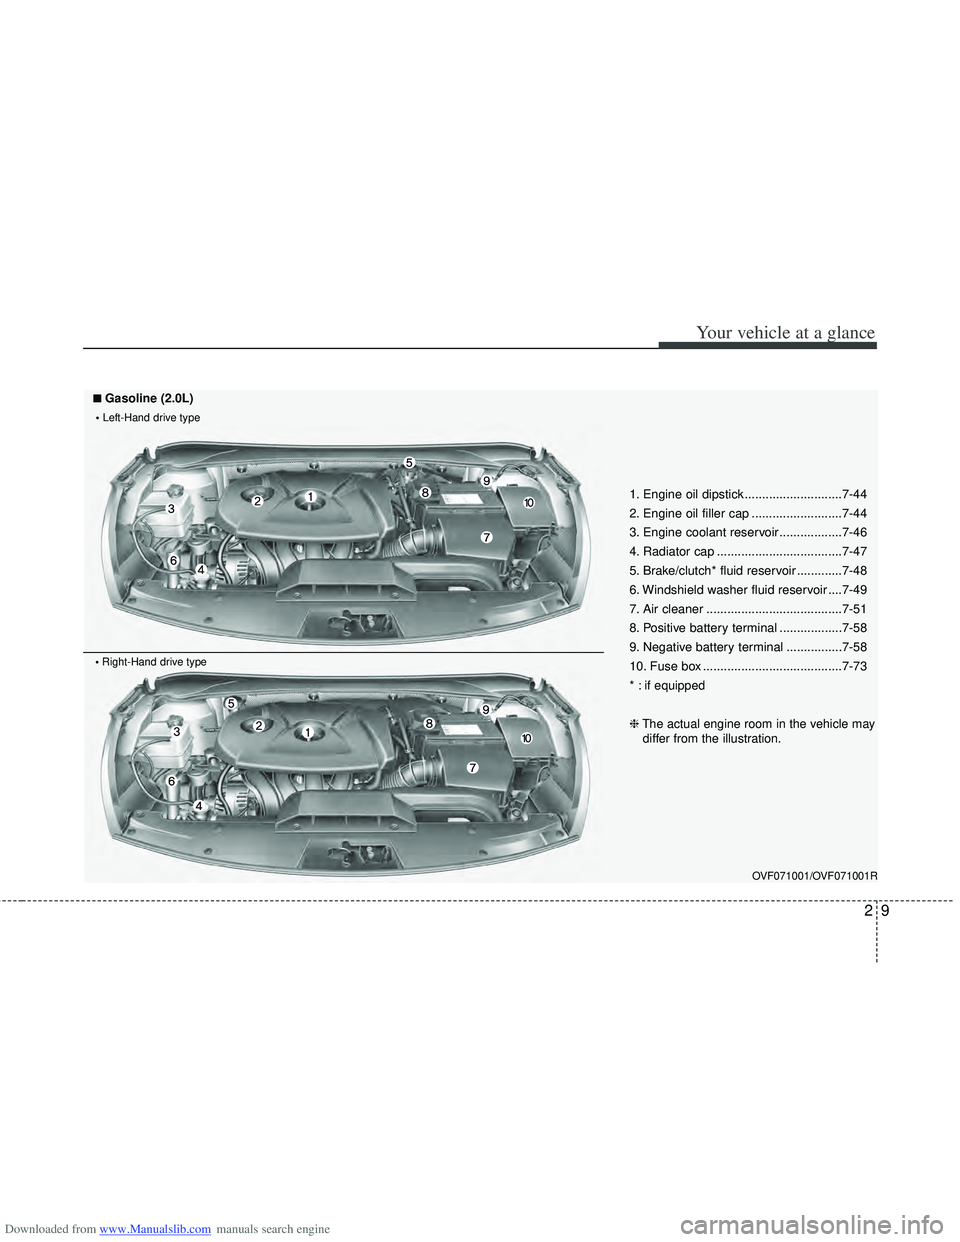 HYUNDAI I40 2018  Owners Manual Downloaded from www.Manualslib.com manuals search engine 29
Your vehicle at a glance
OVF071001/OVF071001R
1. Engine oil dipstick ............................7-44
2. Engine oil filler cap .............